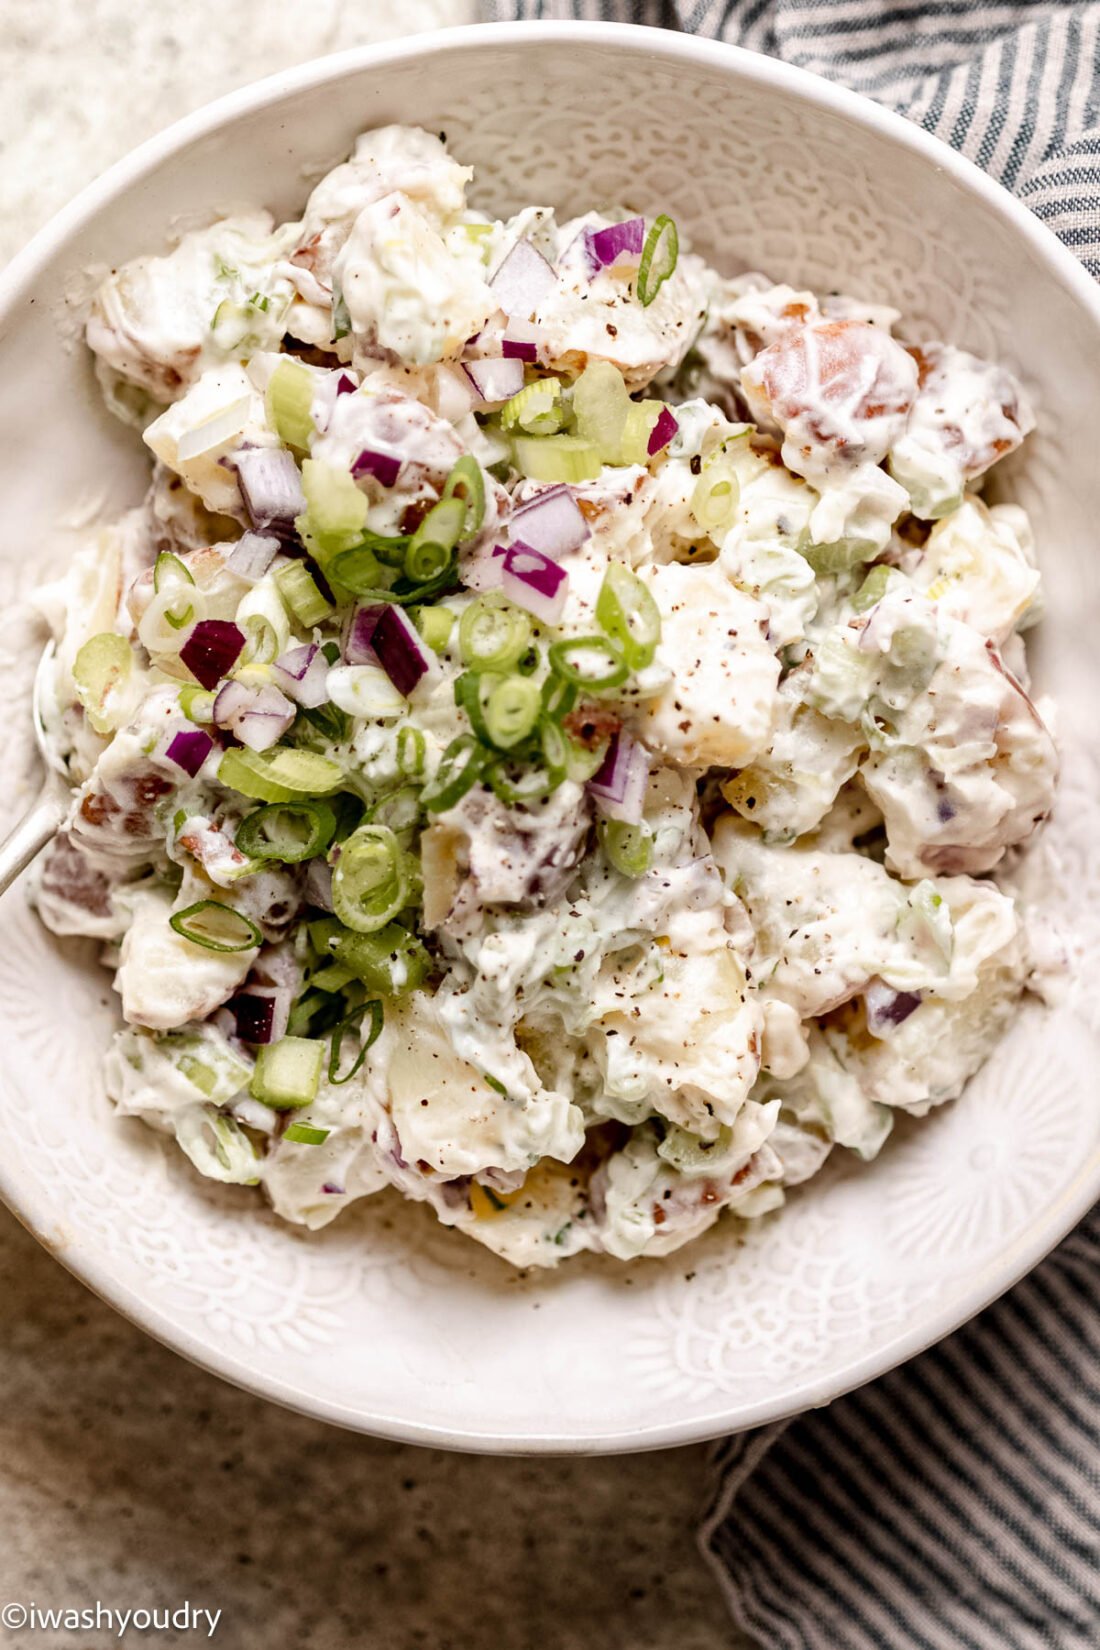 Creamy red potato salad in a white bowl with green onions and cracked pepper on top.